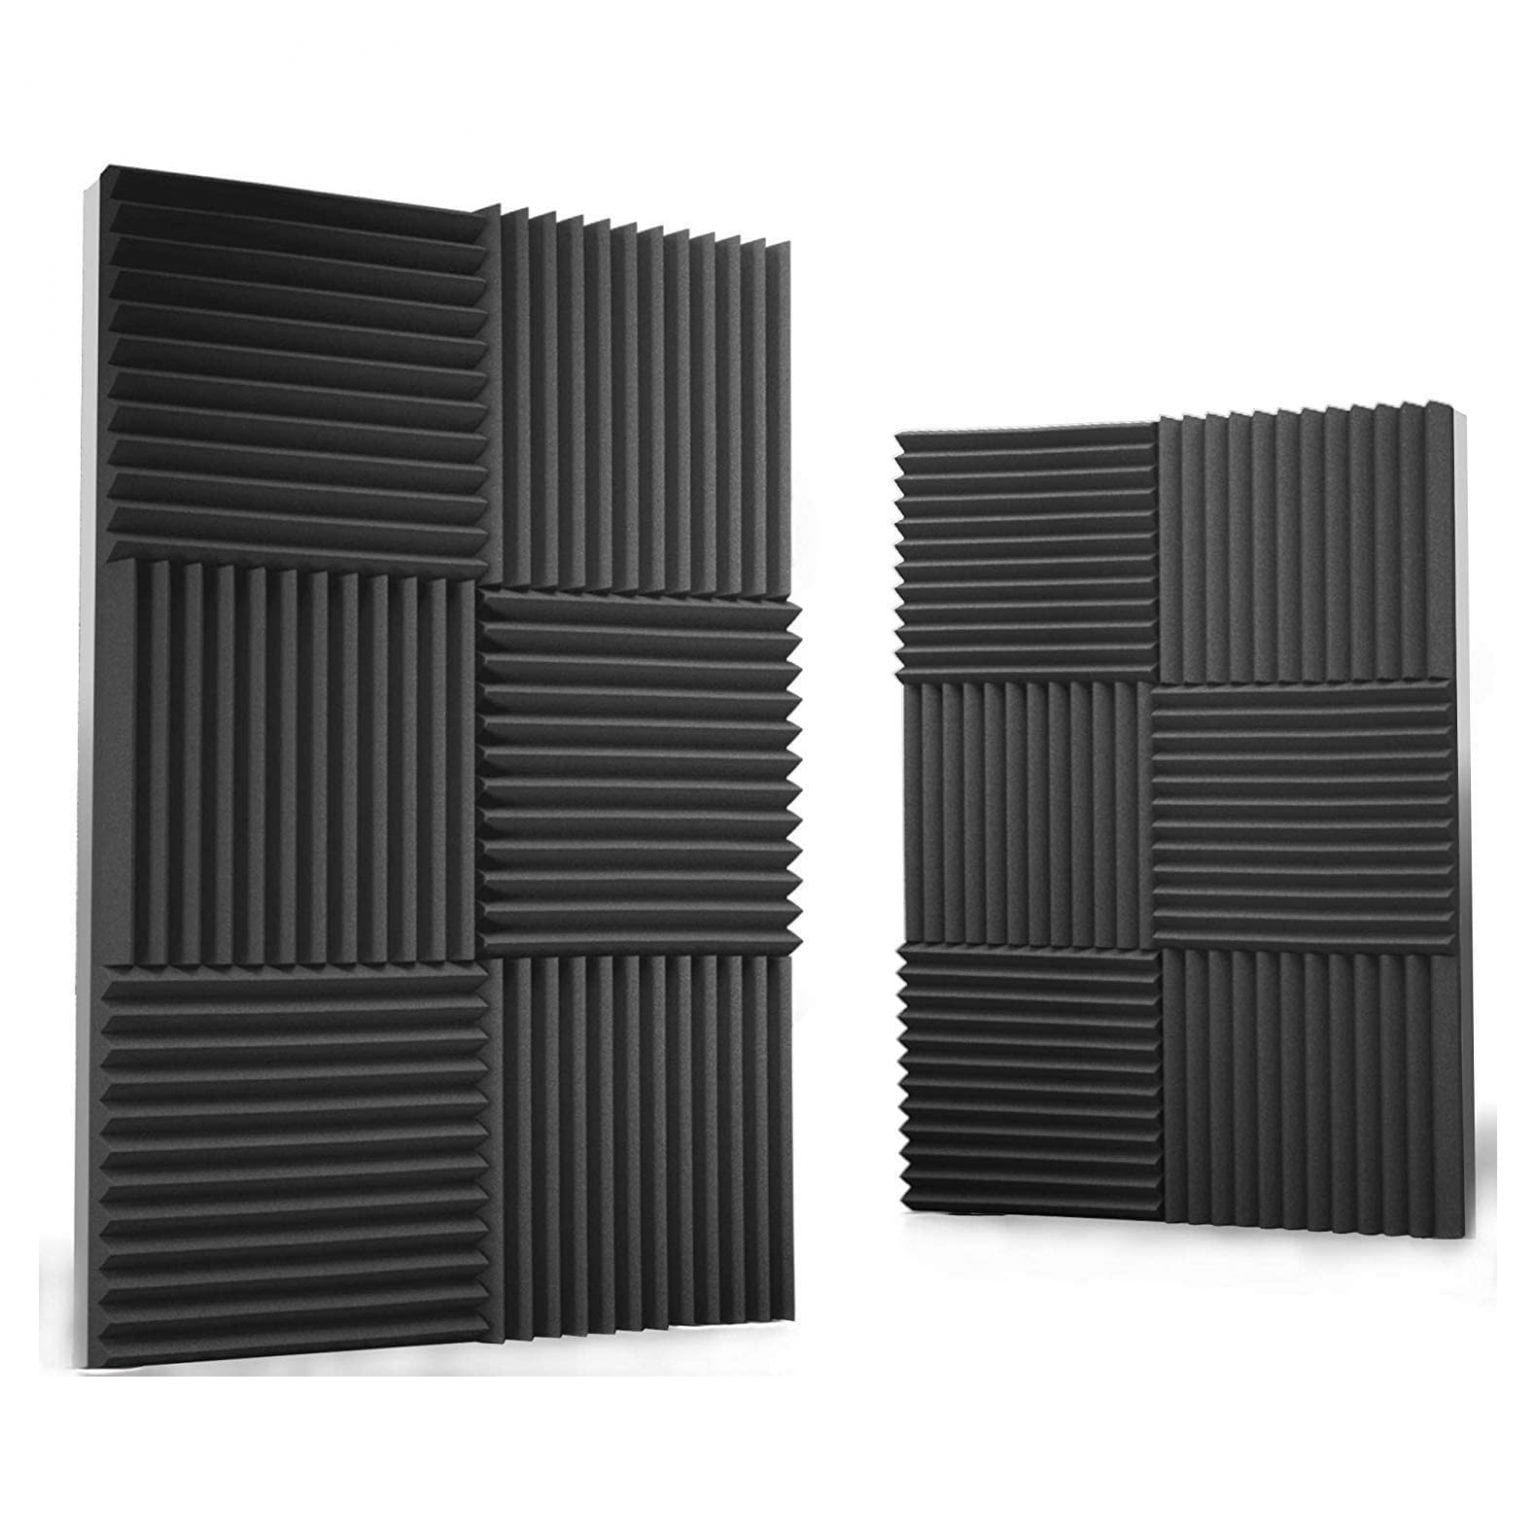 Top 10 Best Soundproofing Panels in 2021 Reviews